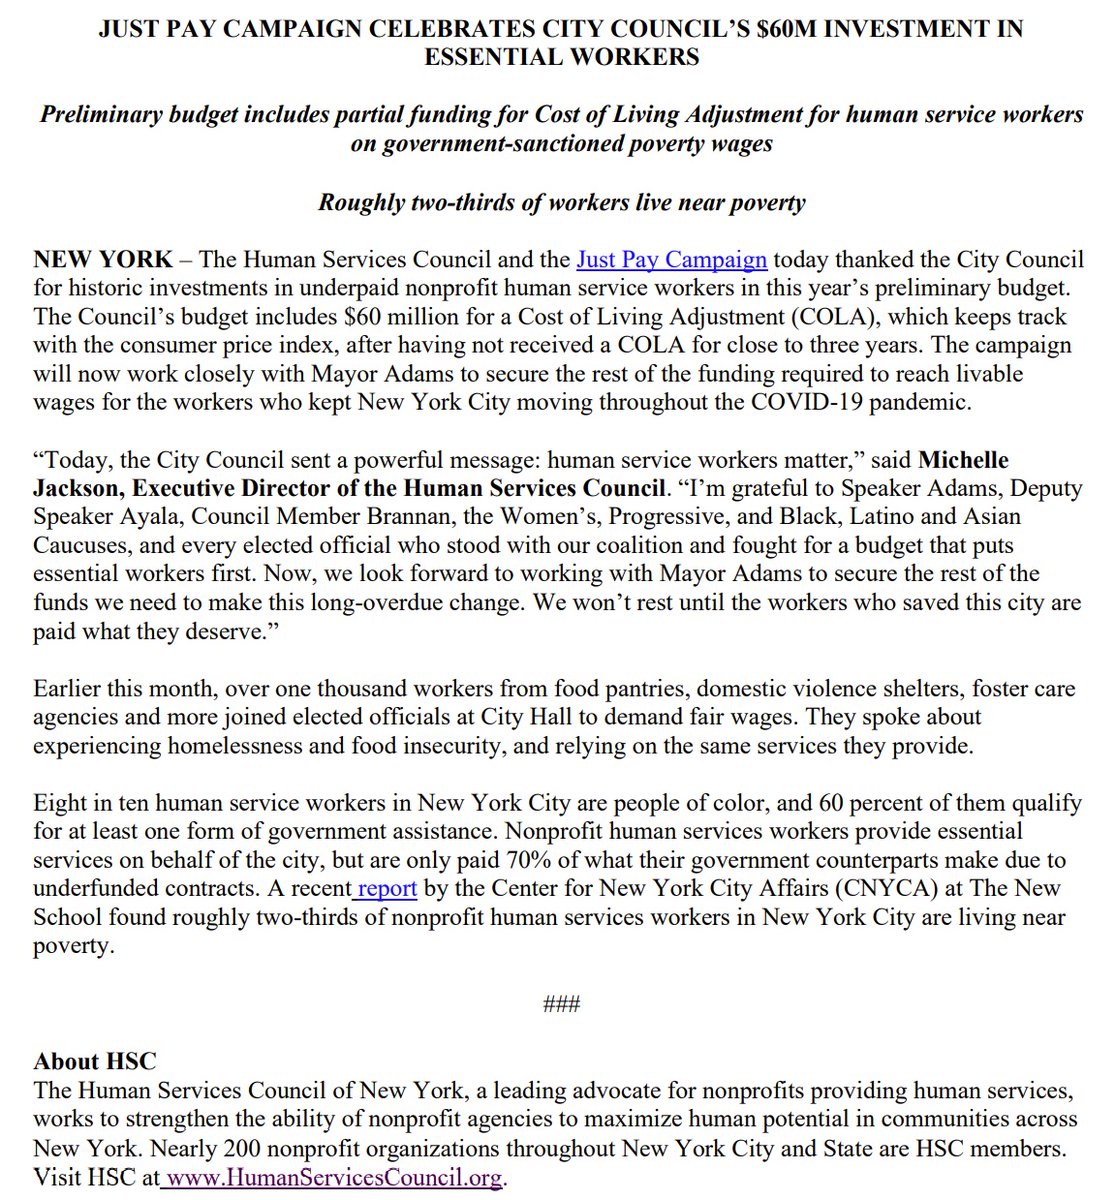 Happy Monday! Thank you @NYCCouncil for including $60m in COLAs in the Council response! We appreciate the great leadership of @AdrienneToYou @JustinBrannan for recognizing the value of #humanservices workers! See our statement for more. #justpay